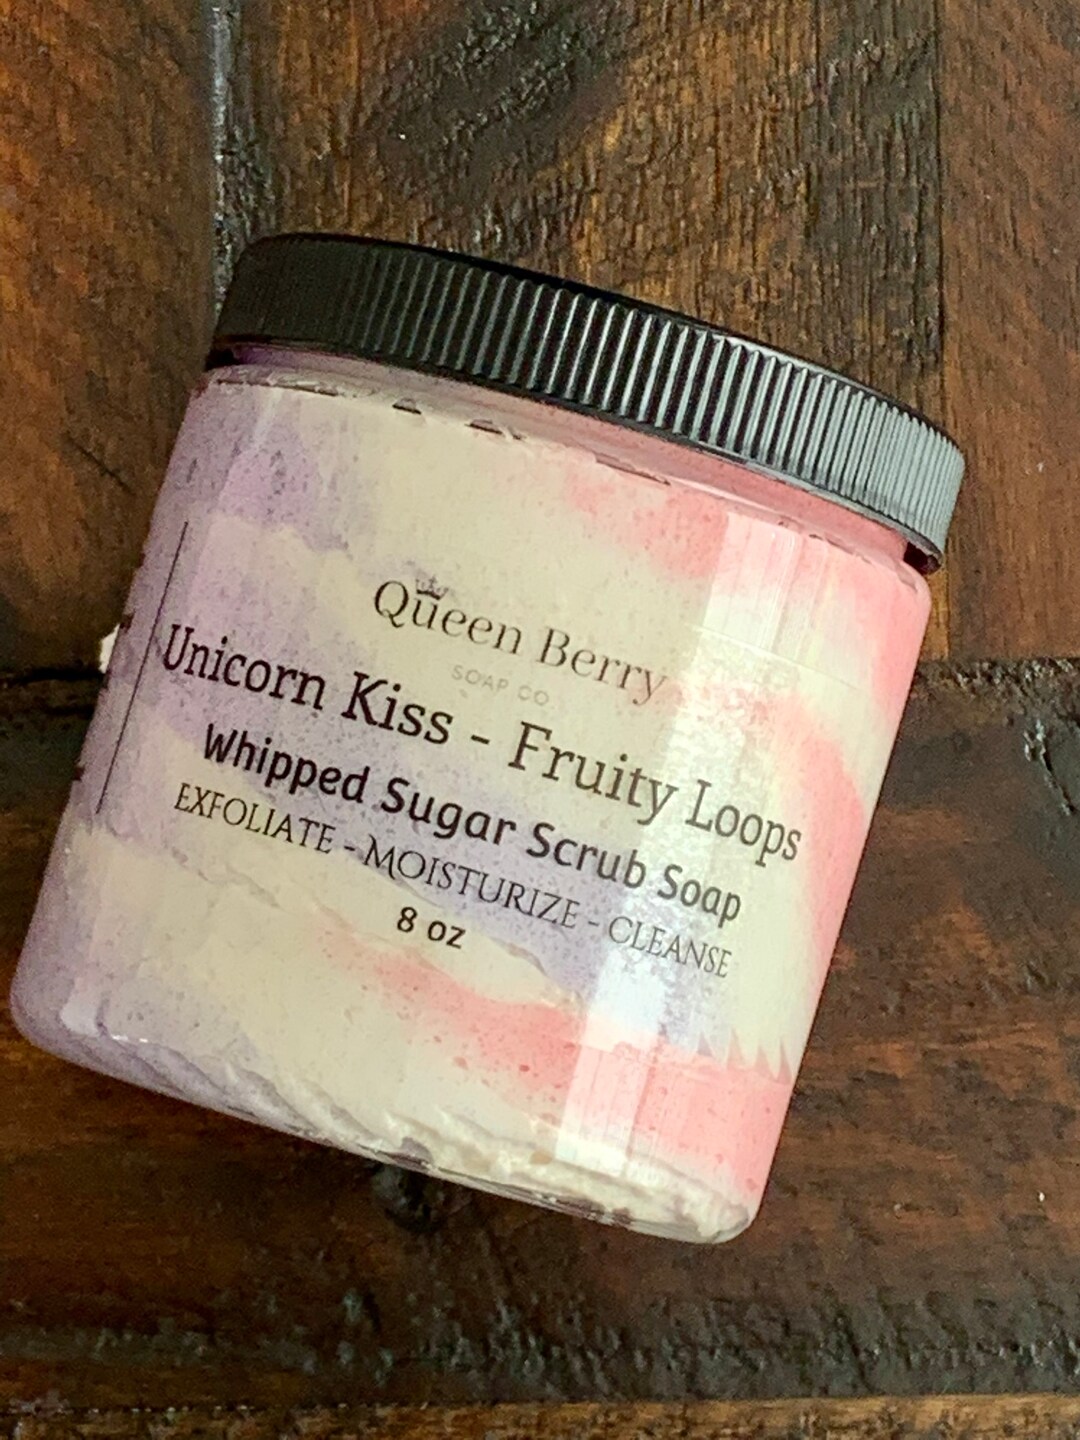 Unicorn Kiss - Fruity Loops - Whipped Body Butter - Hand & Body